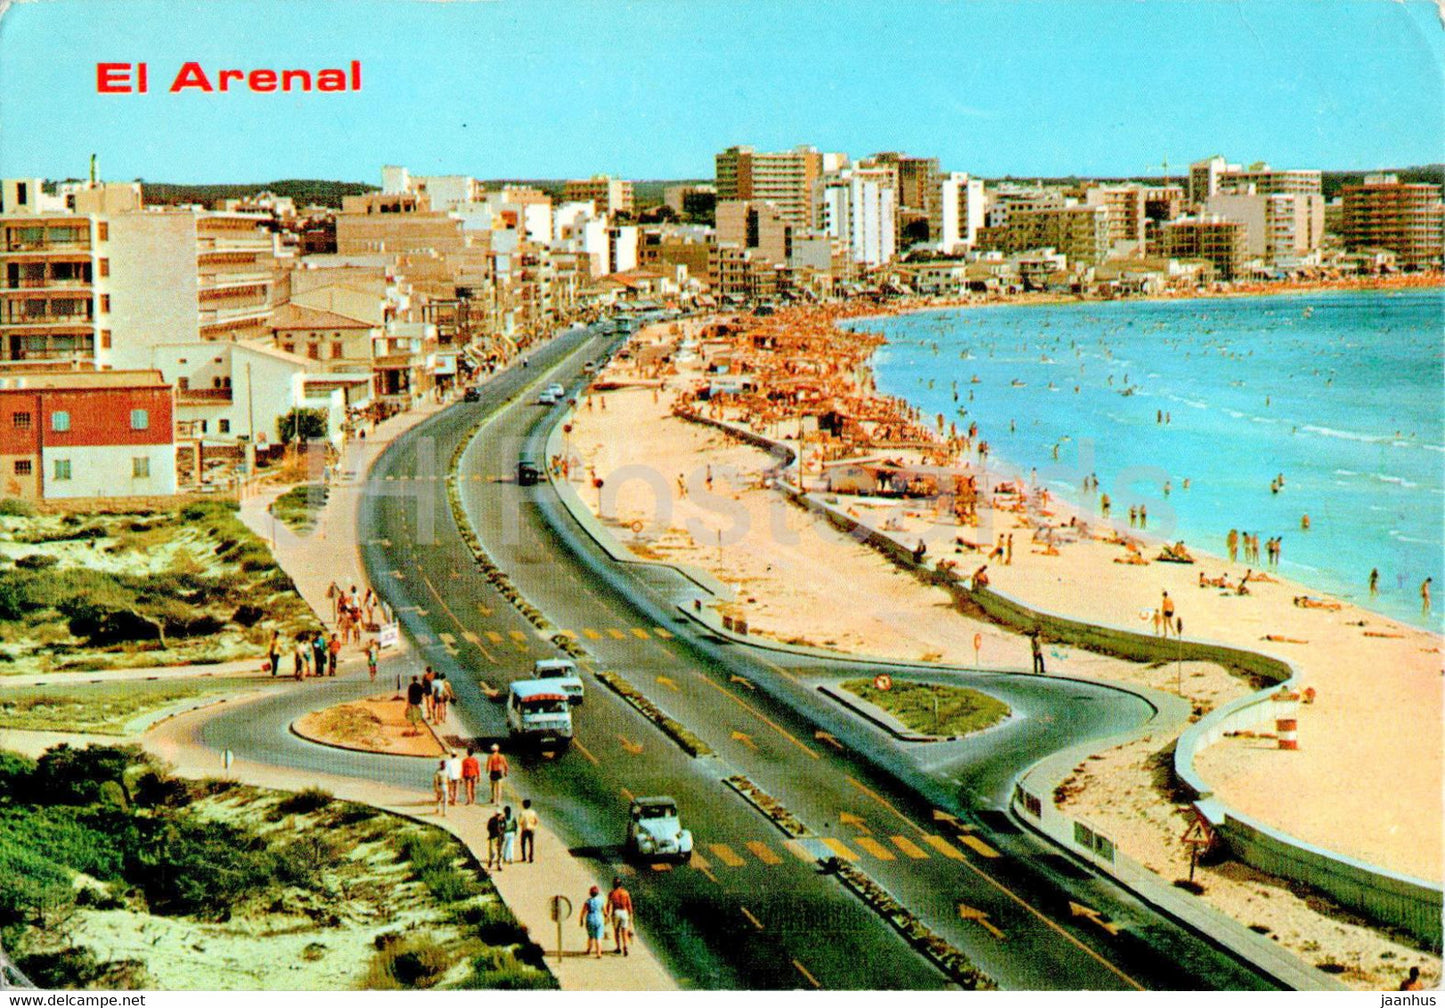 El Arenal - Mallorca - 5089 - Spain - used - JH Postcards